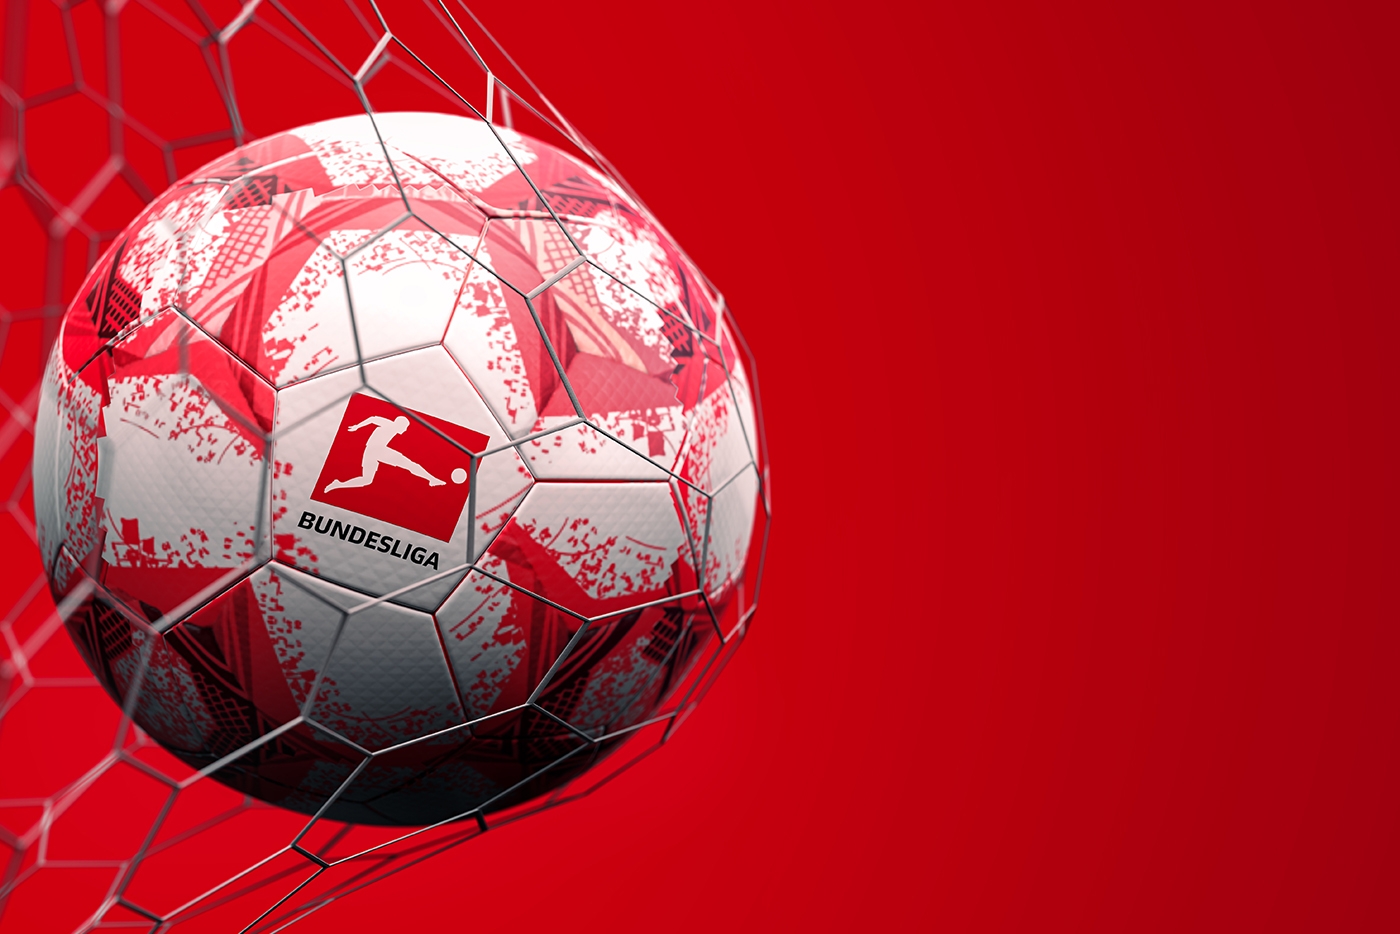 How The Bundesliga Leverages Data And AI To Become The World’s Most Digitally-Driven Football League | Bernard Marr